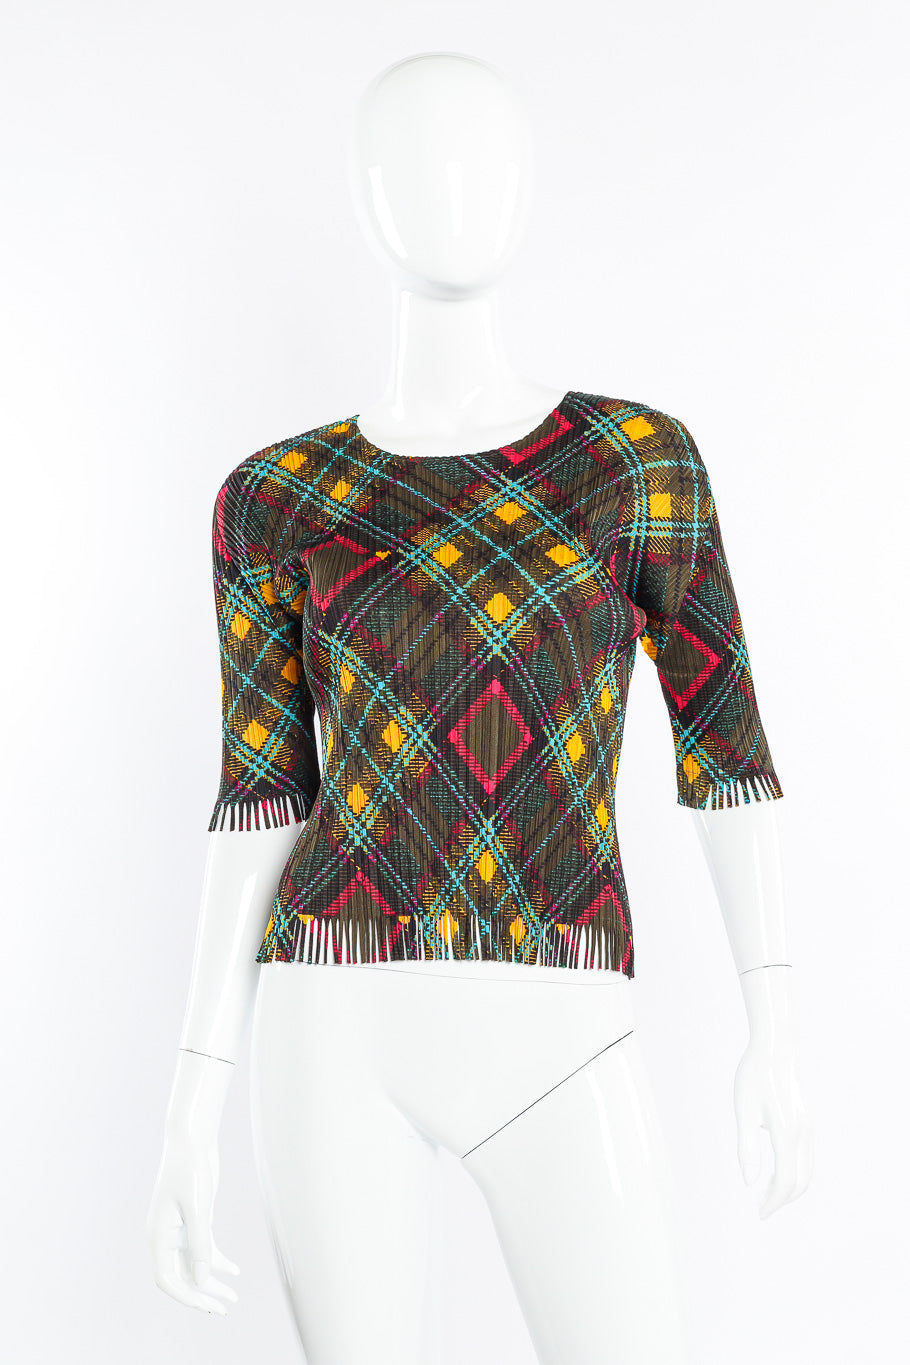 Pleated fringe top by Issey Miyake on mannequin front @recessla